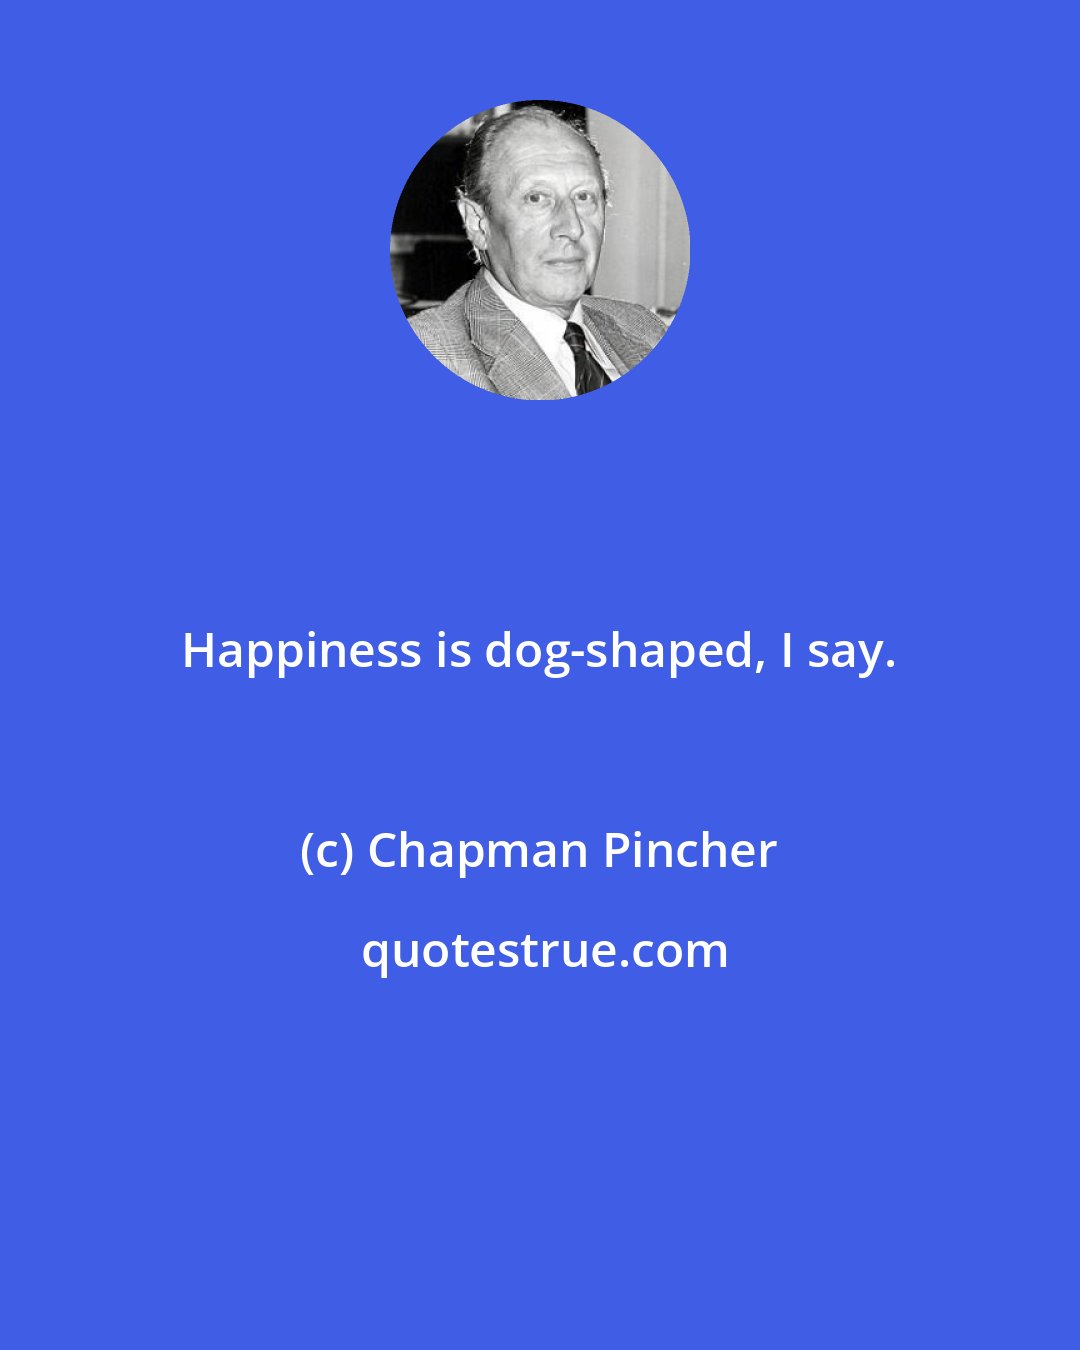 Chapman Pincher: Happiness is dog-shaped, I say.